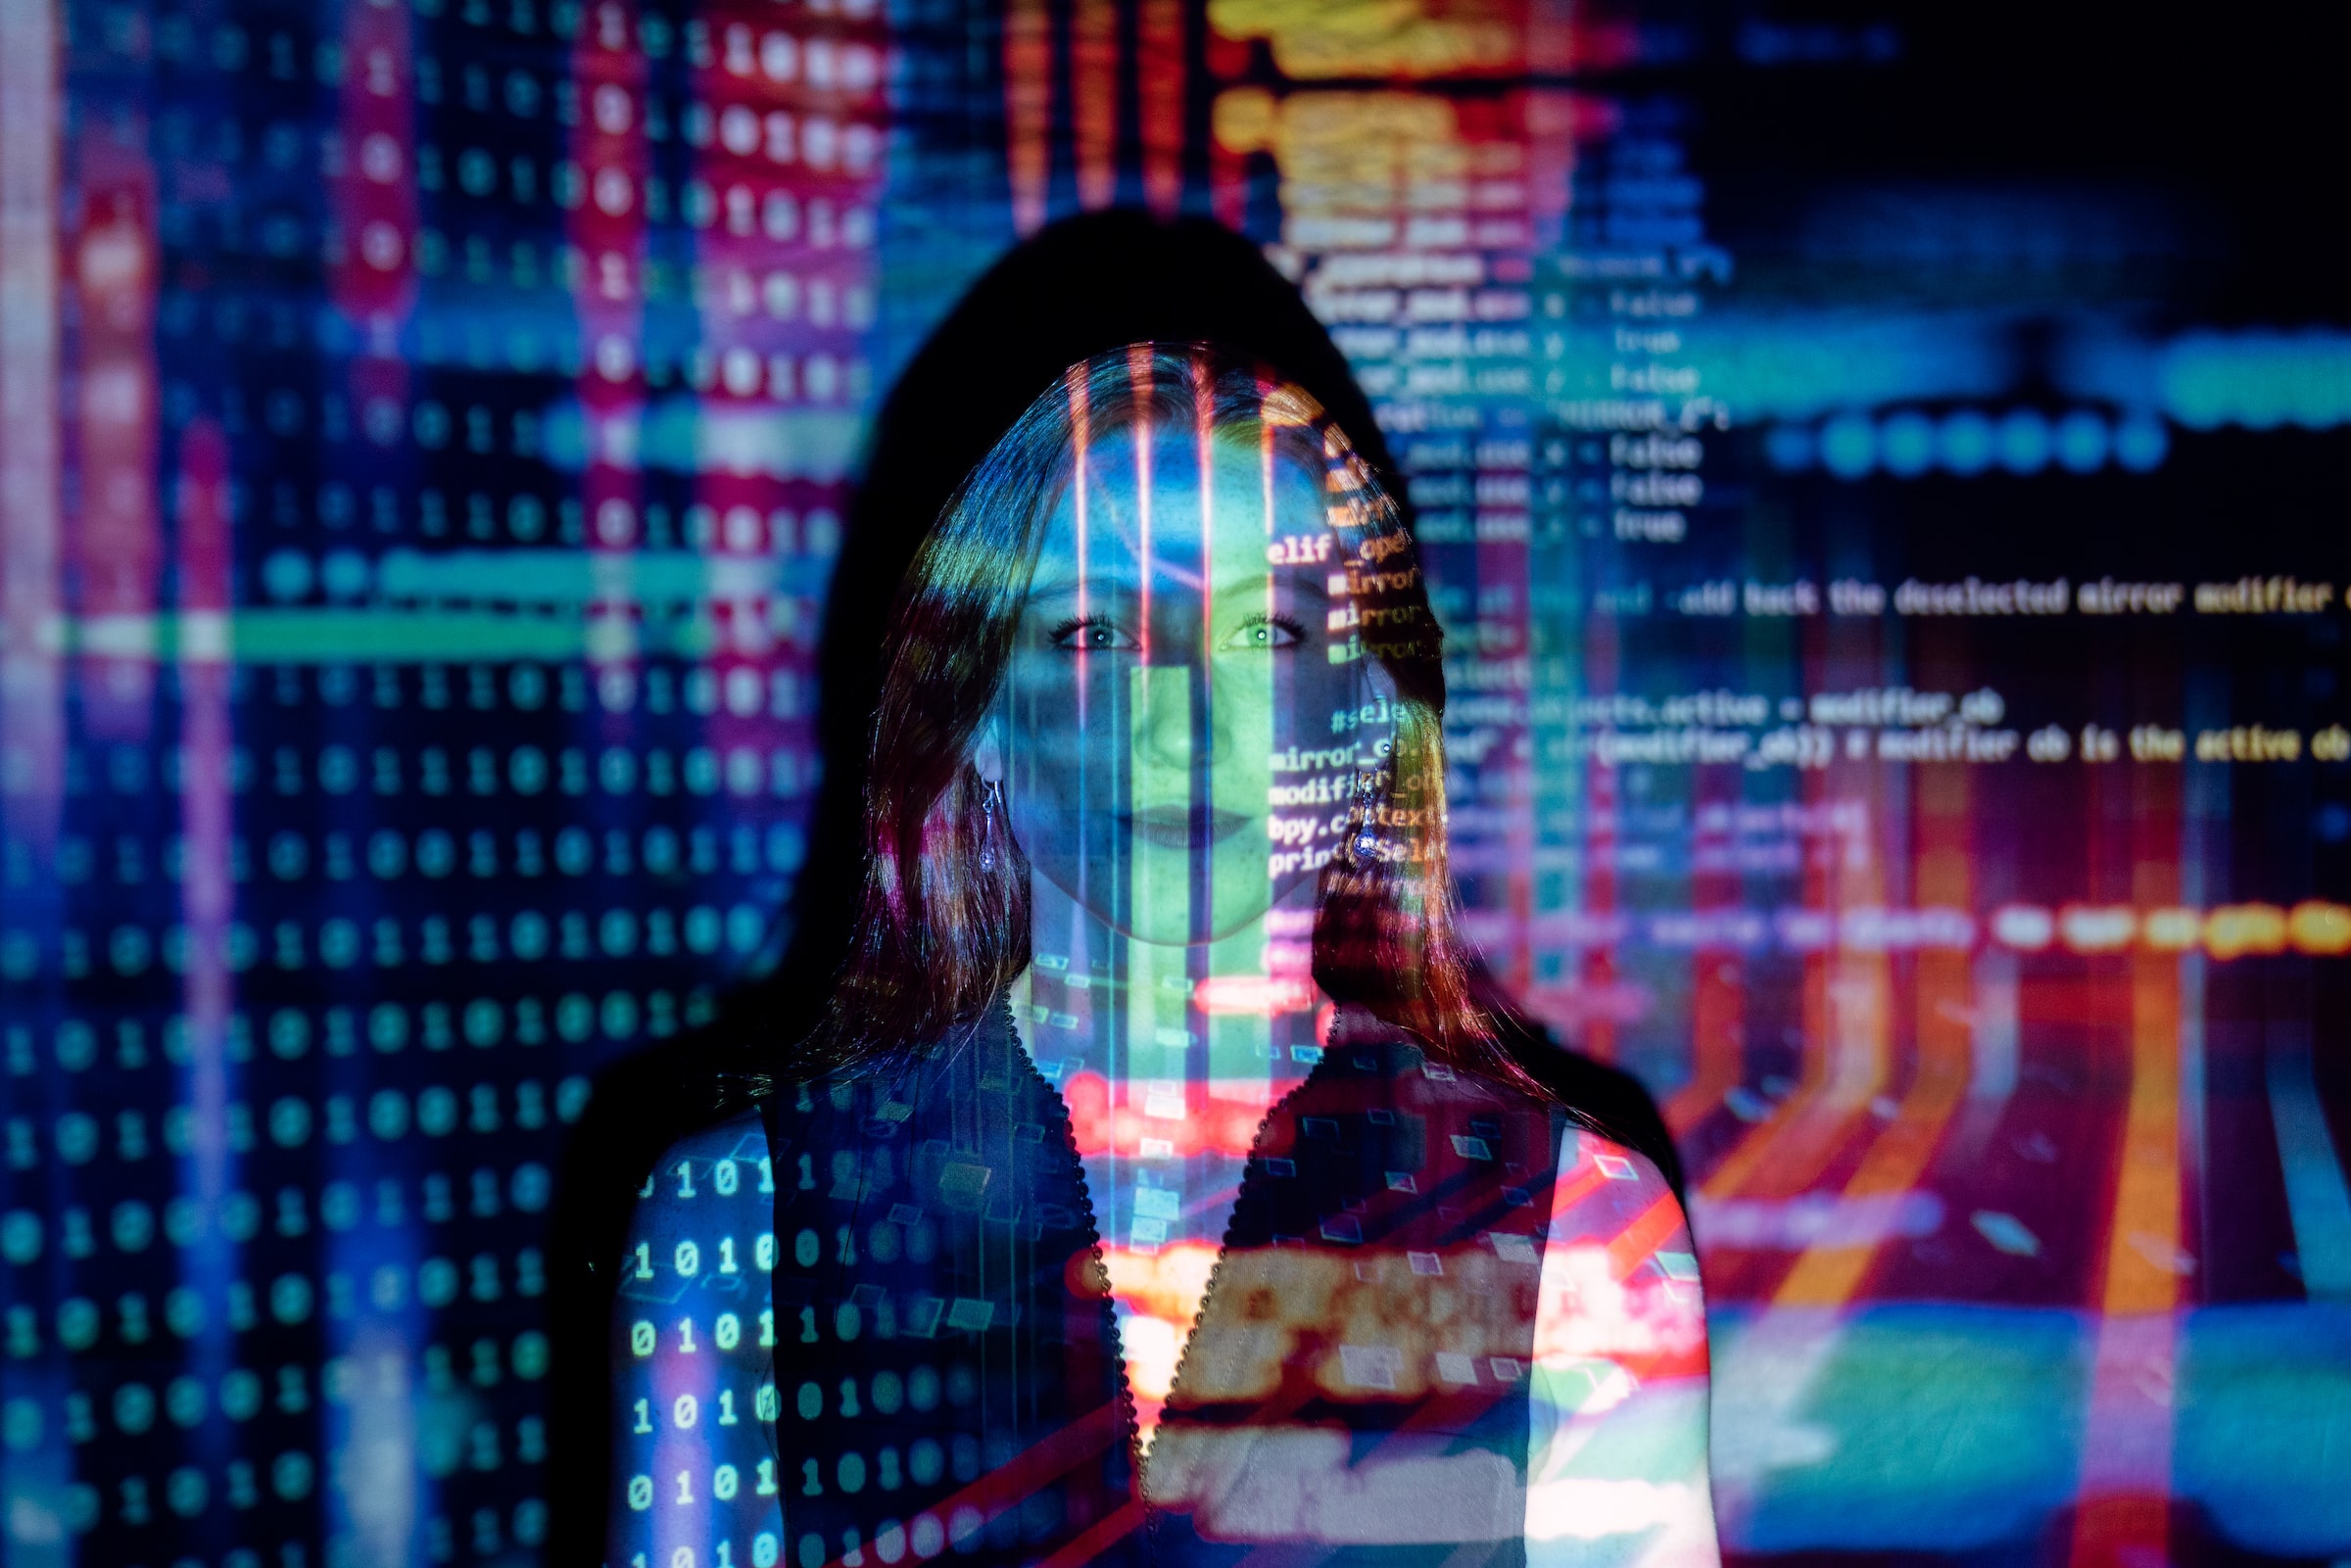 Computer code and various color patterns are projected onto a woman's face